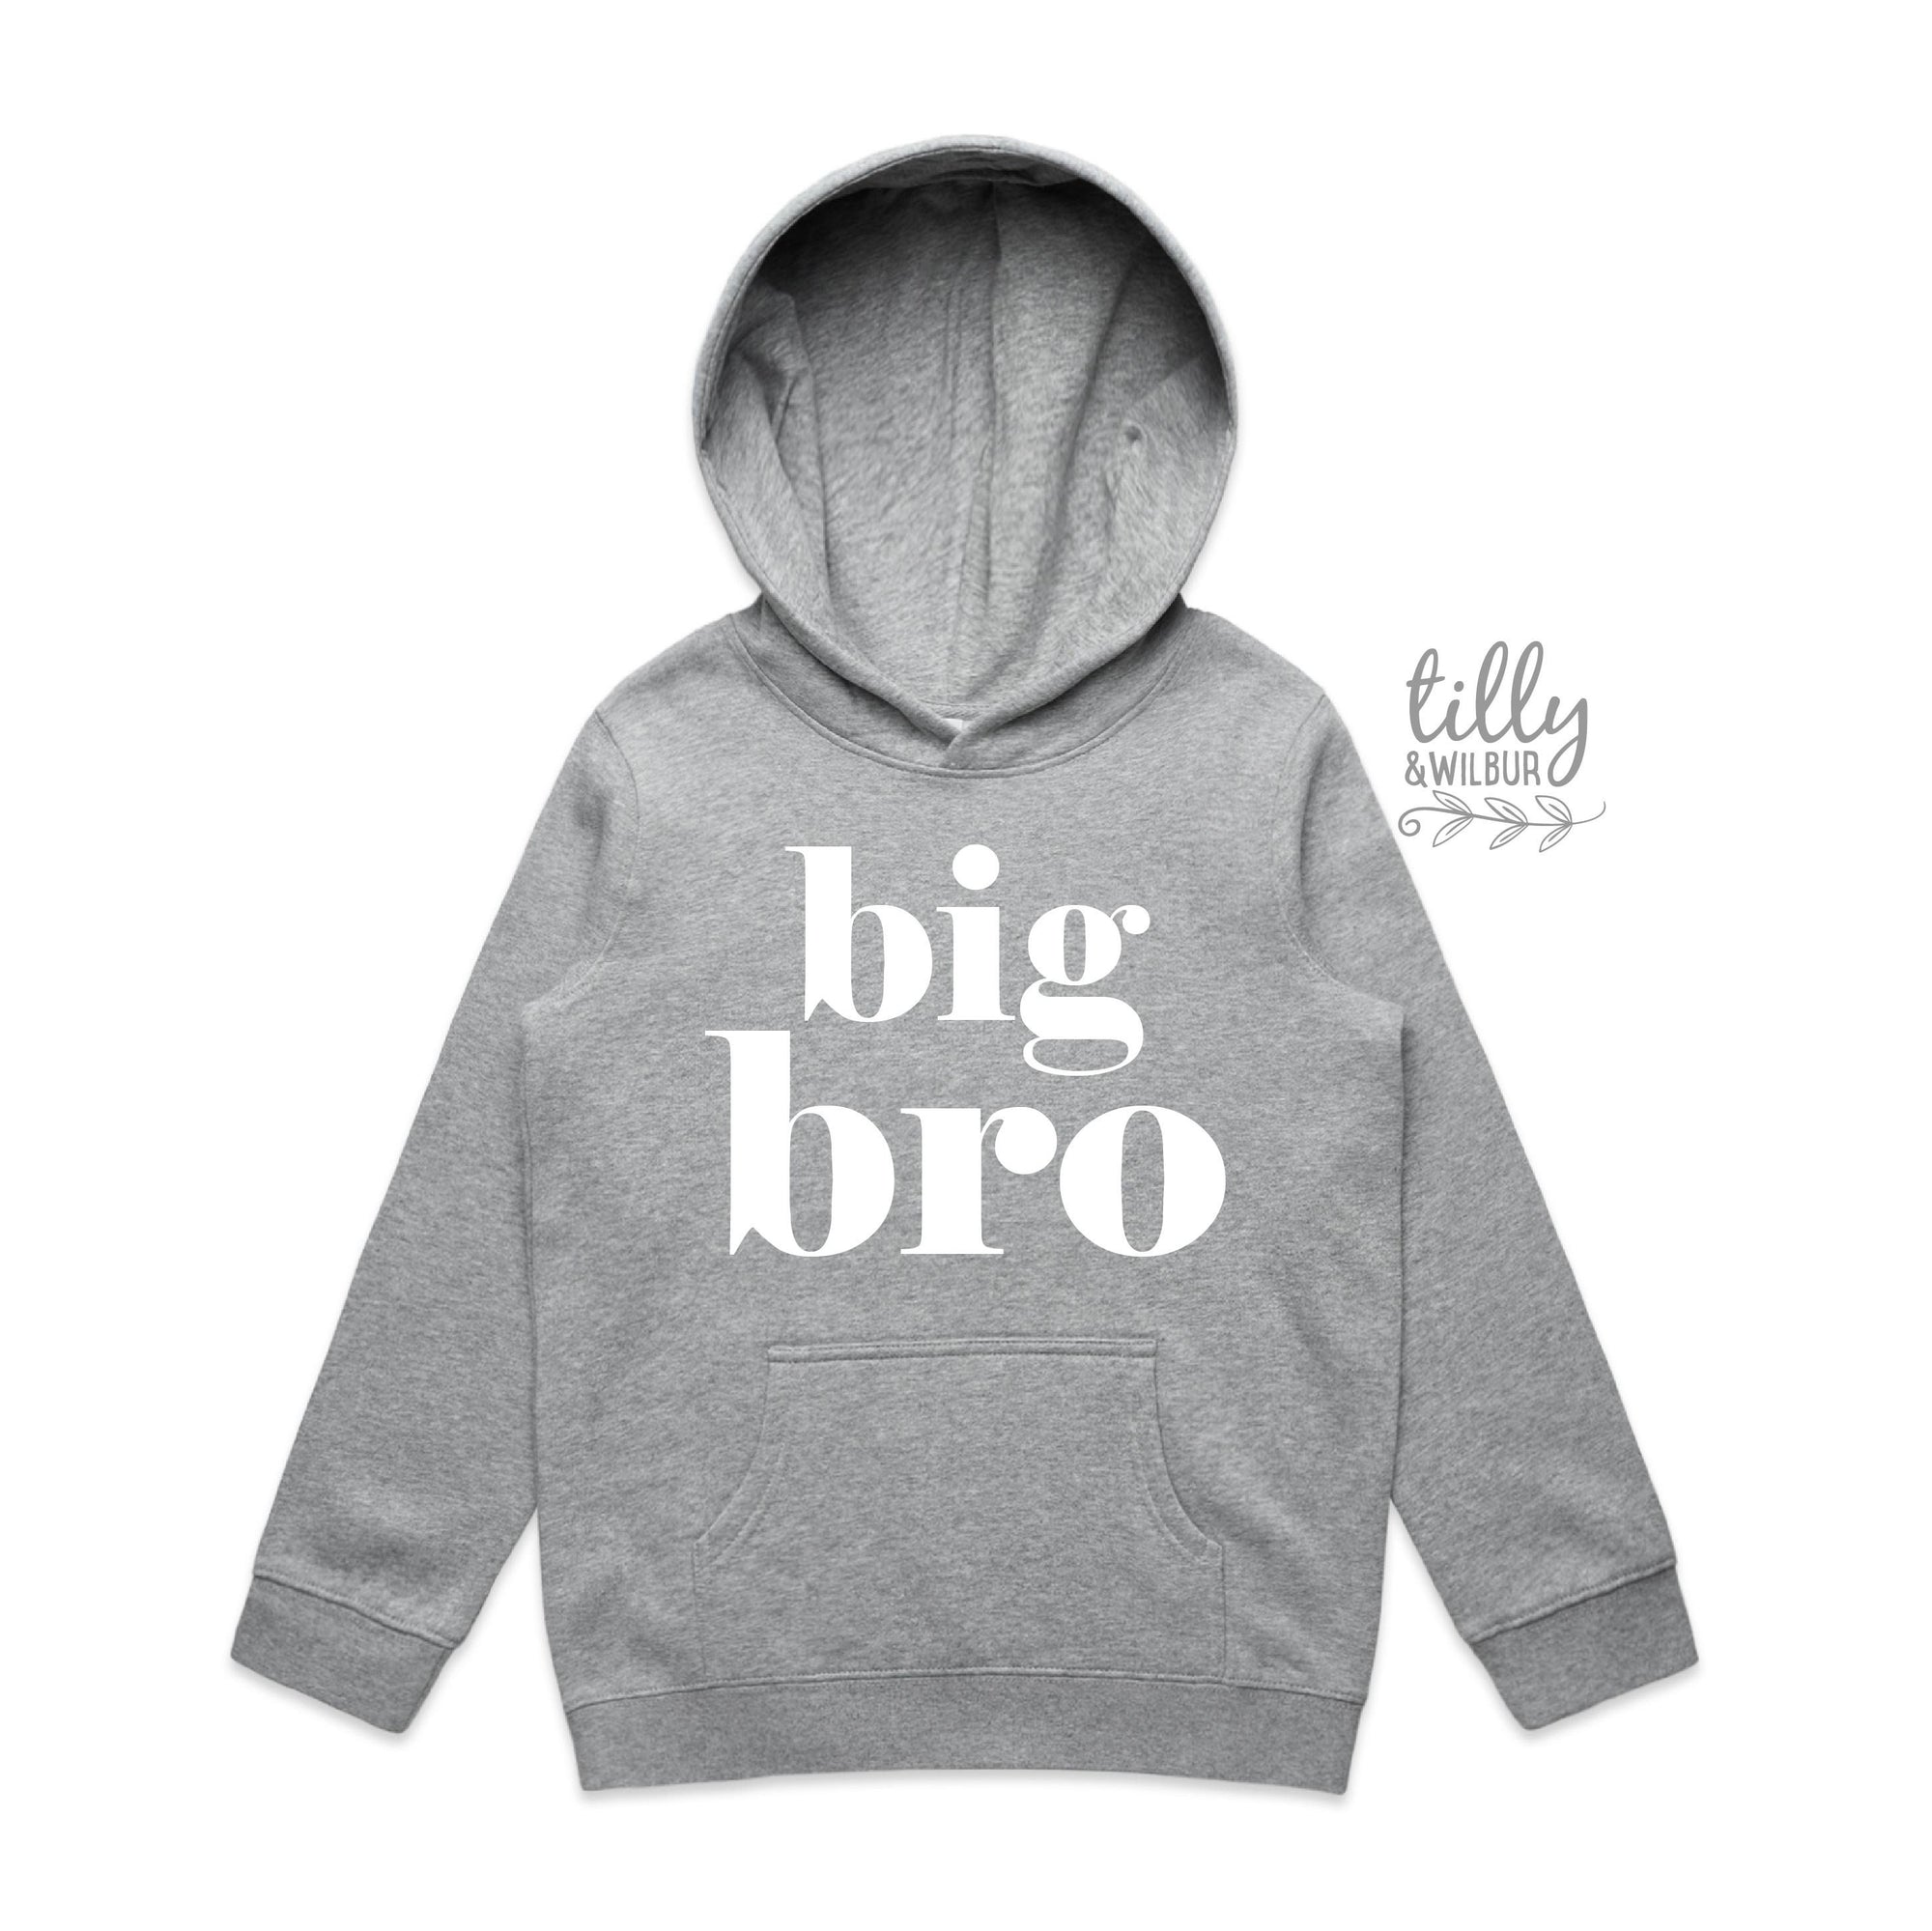 Big Bro Hoodie, Promoted To Big Brother Jumper, Big Brother Sweatshirt, I'm Going To Be A Big Brother, Pregnancy Announcement T-Shirt, Bro